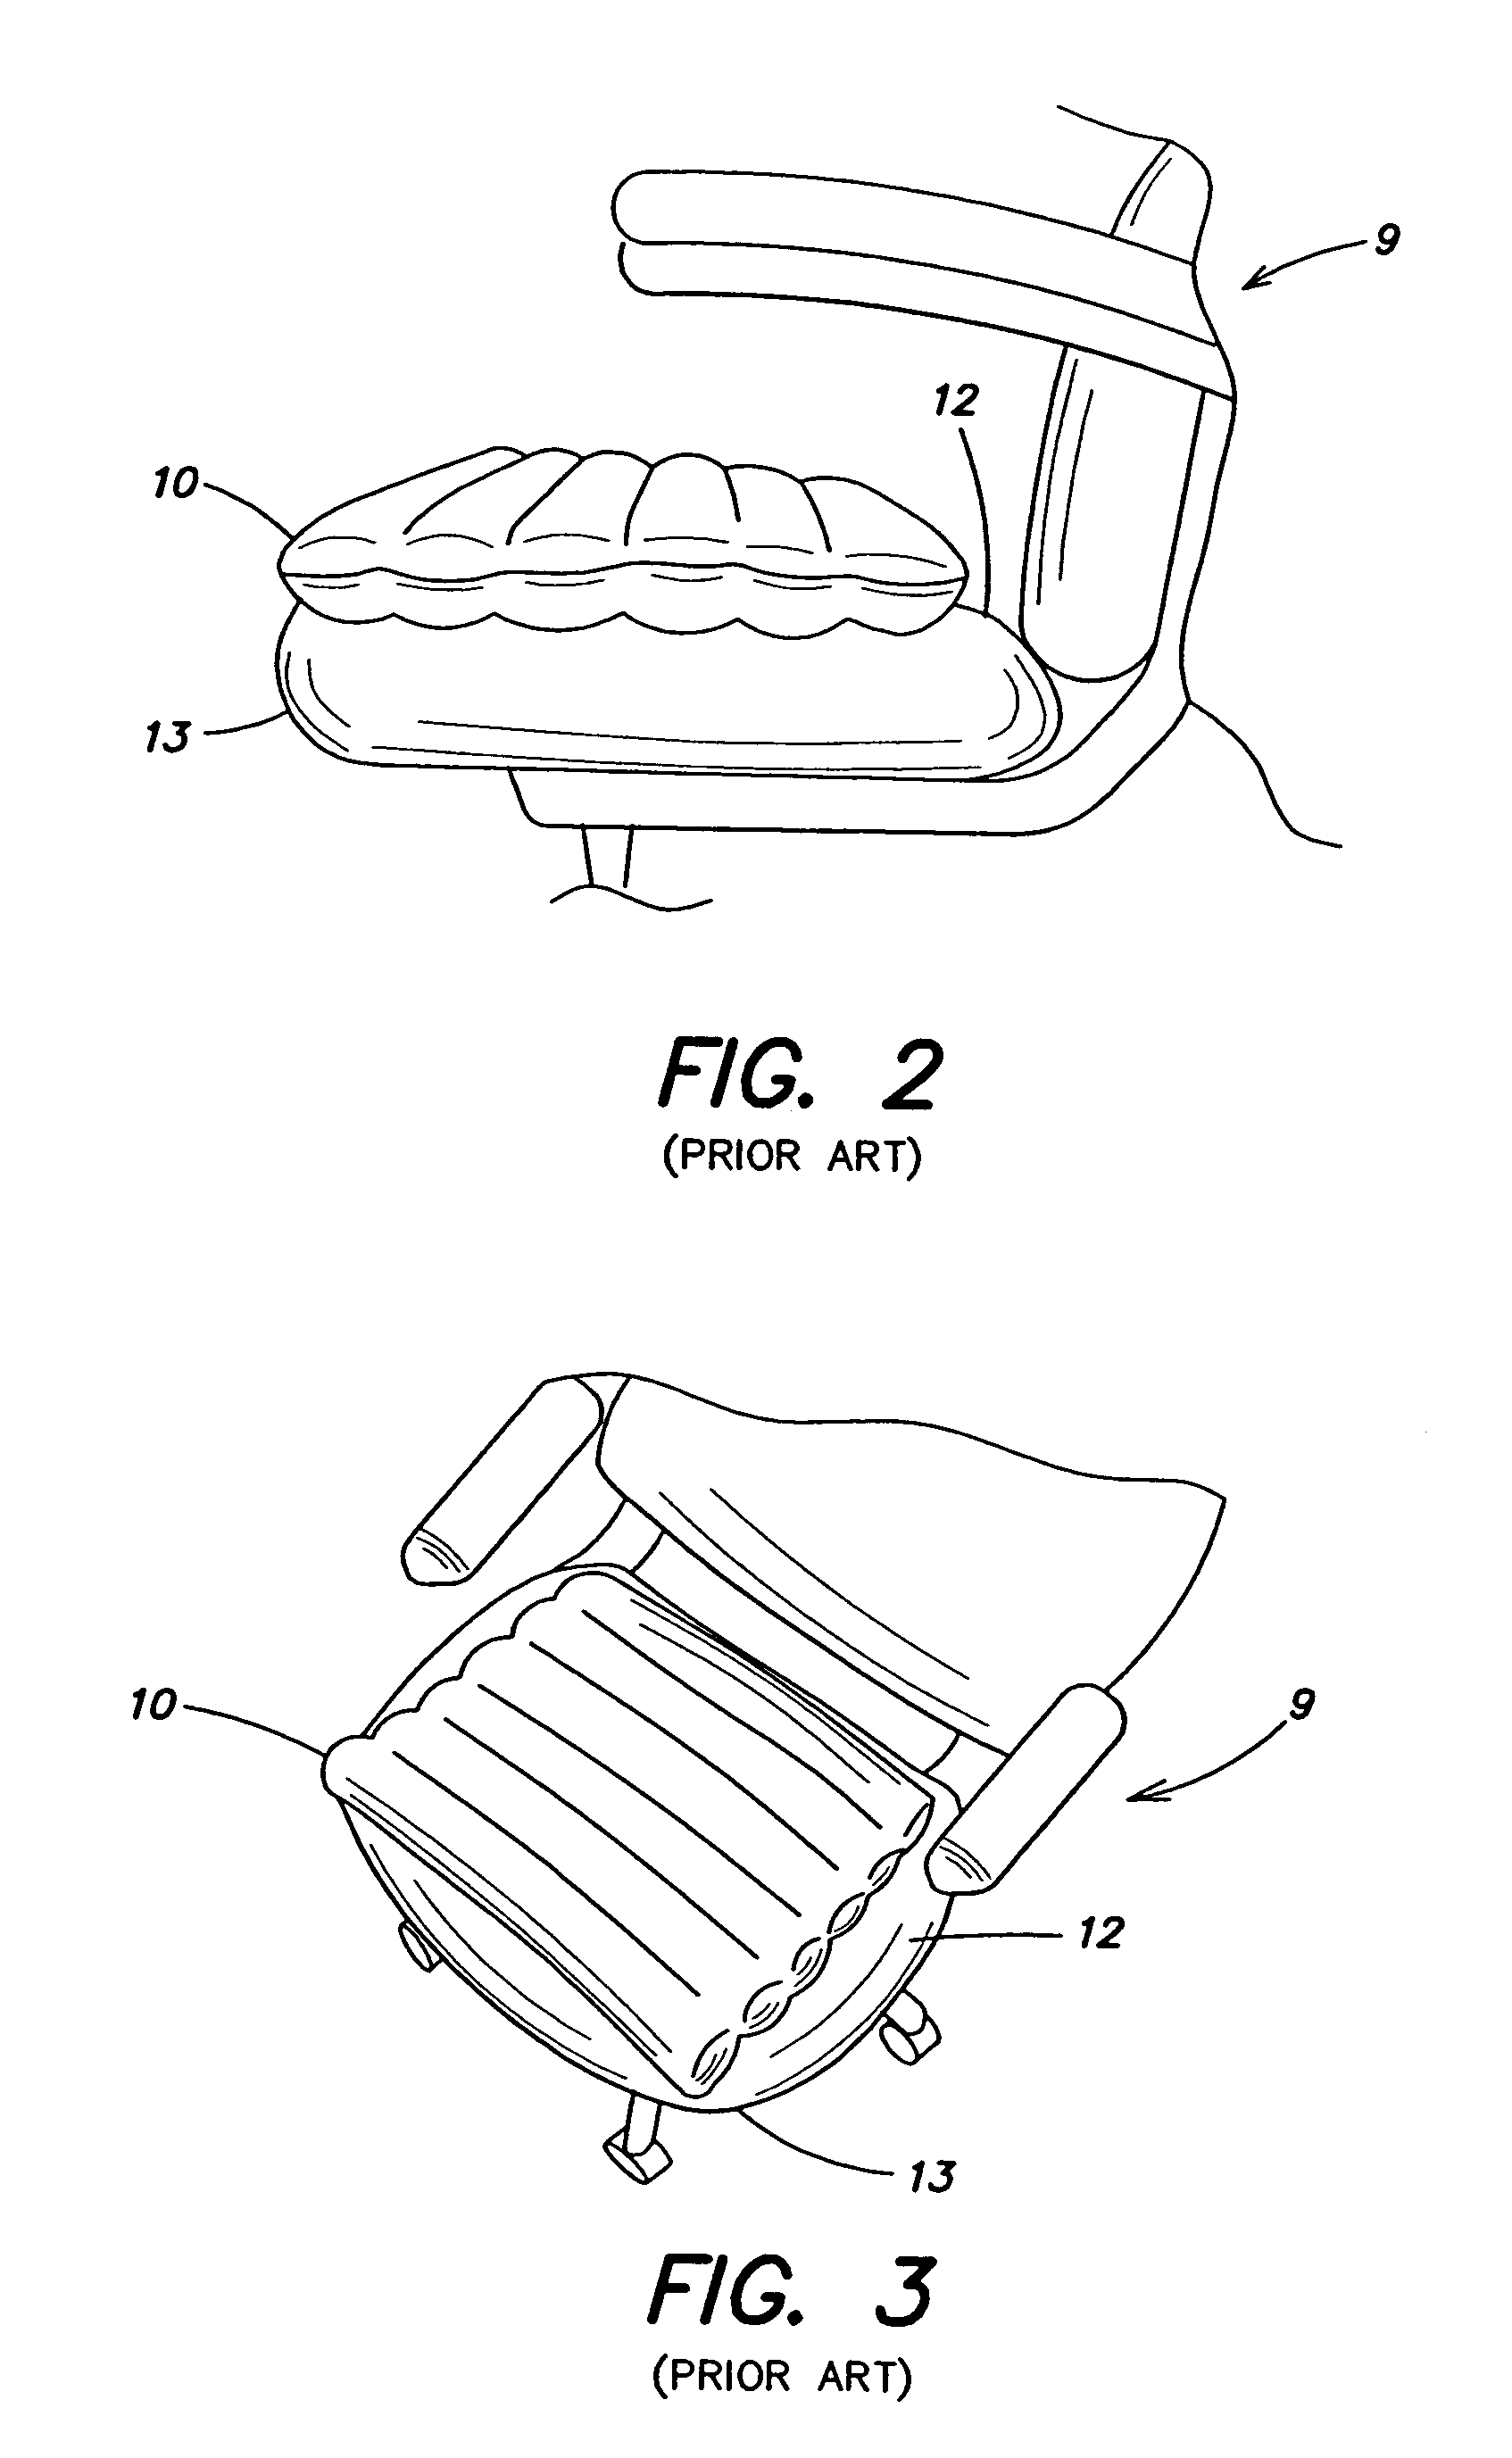 Body support surface comfort device